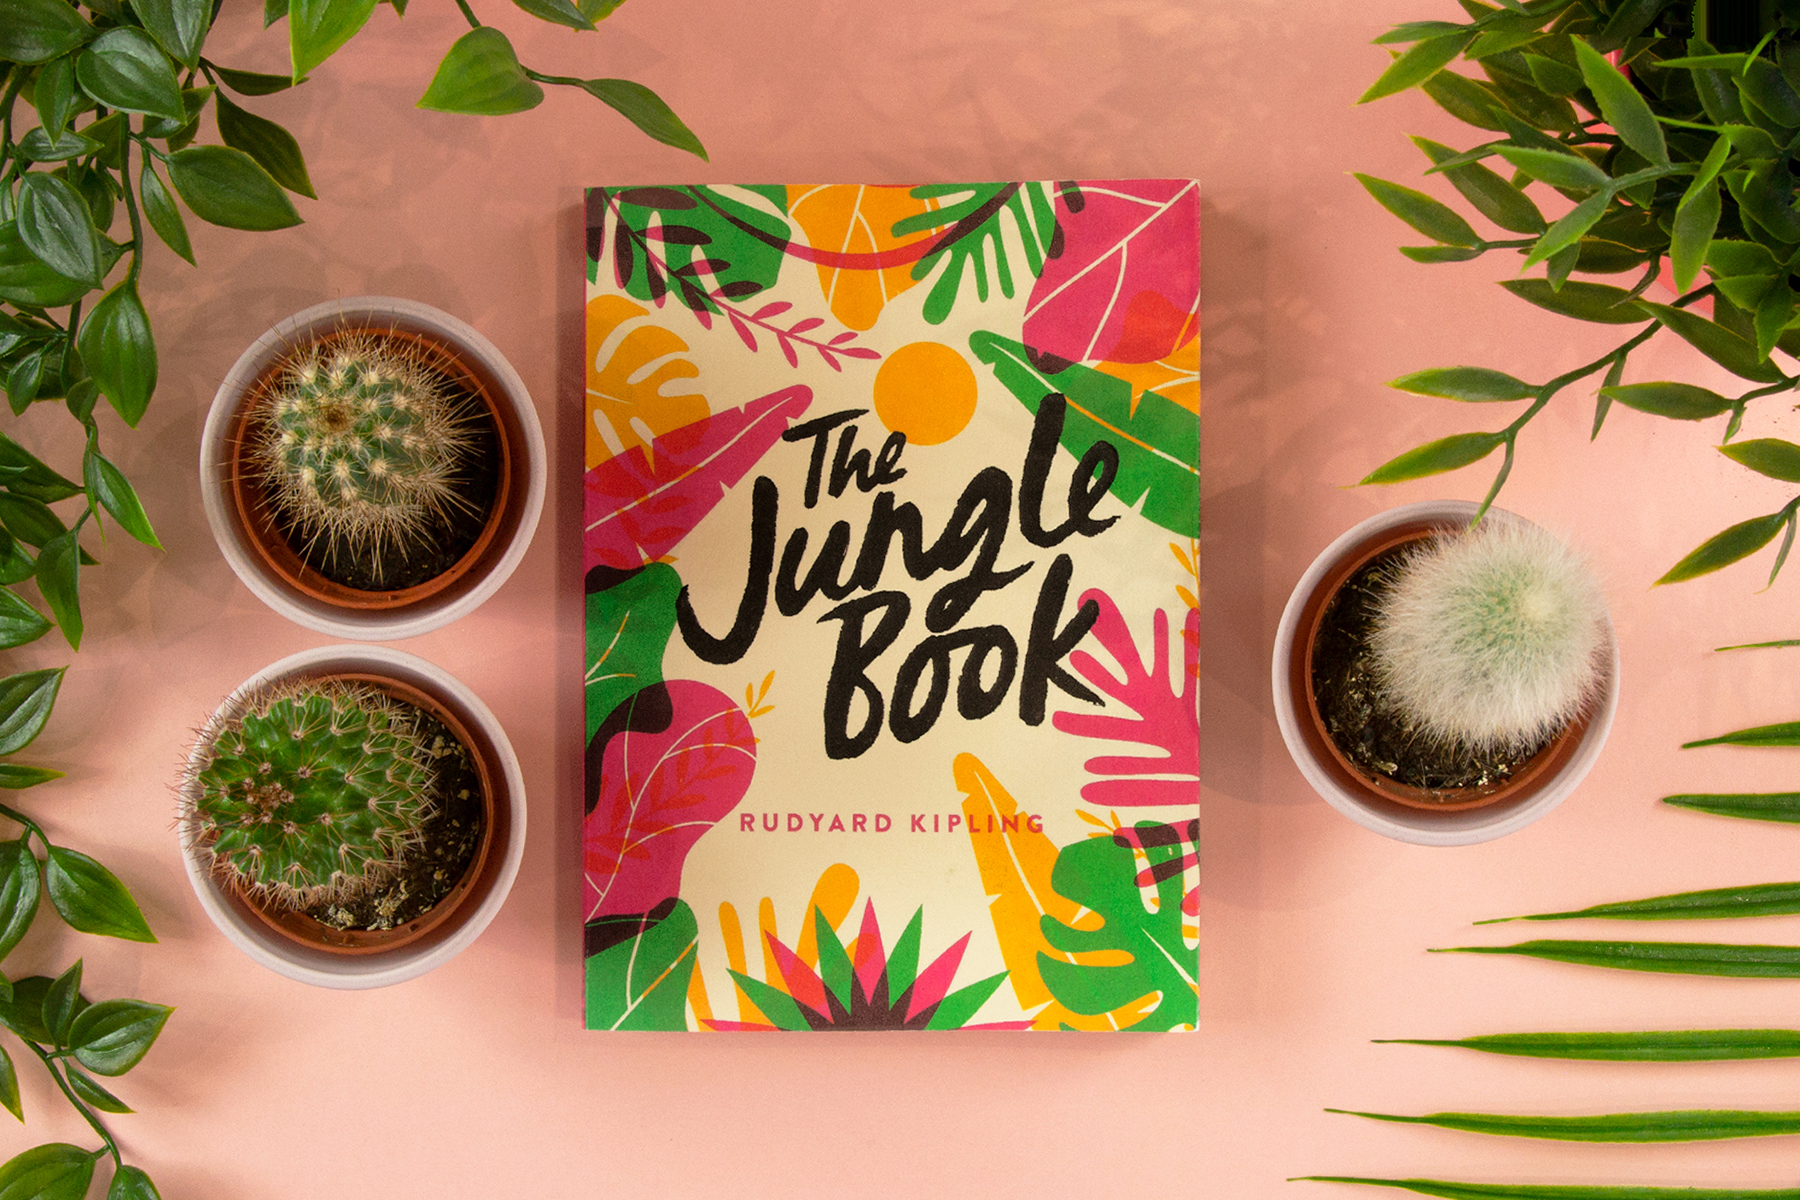 A photo of the book The Jungle Book by Rudyard Kipling on a light peach background surrounded by cacti and plants